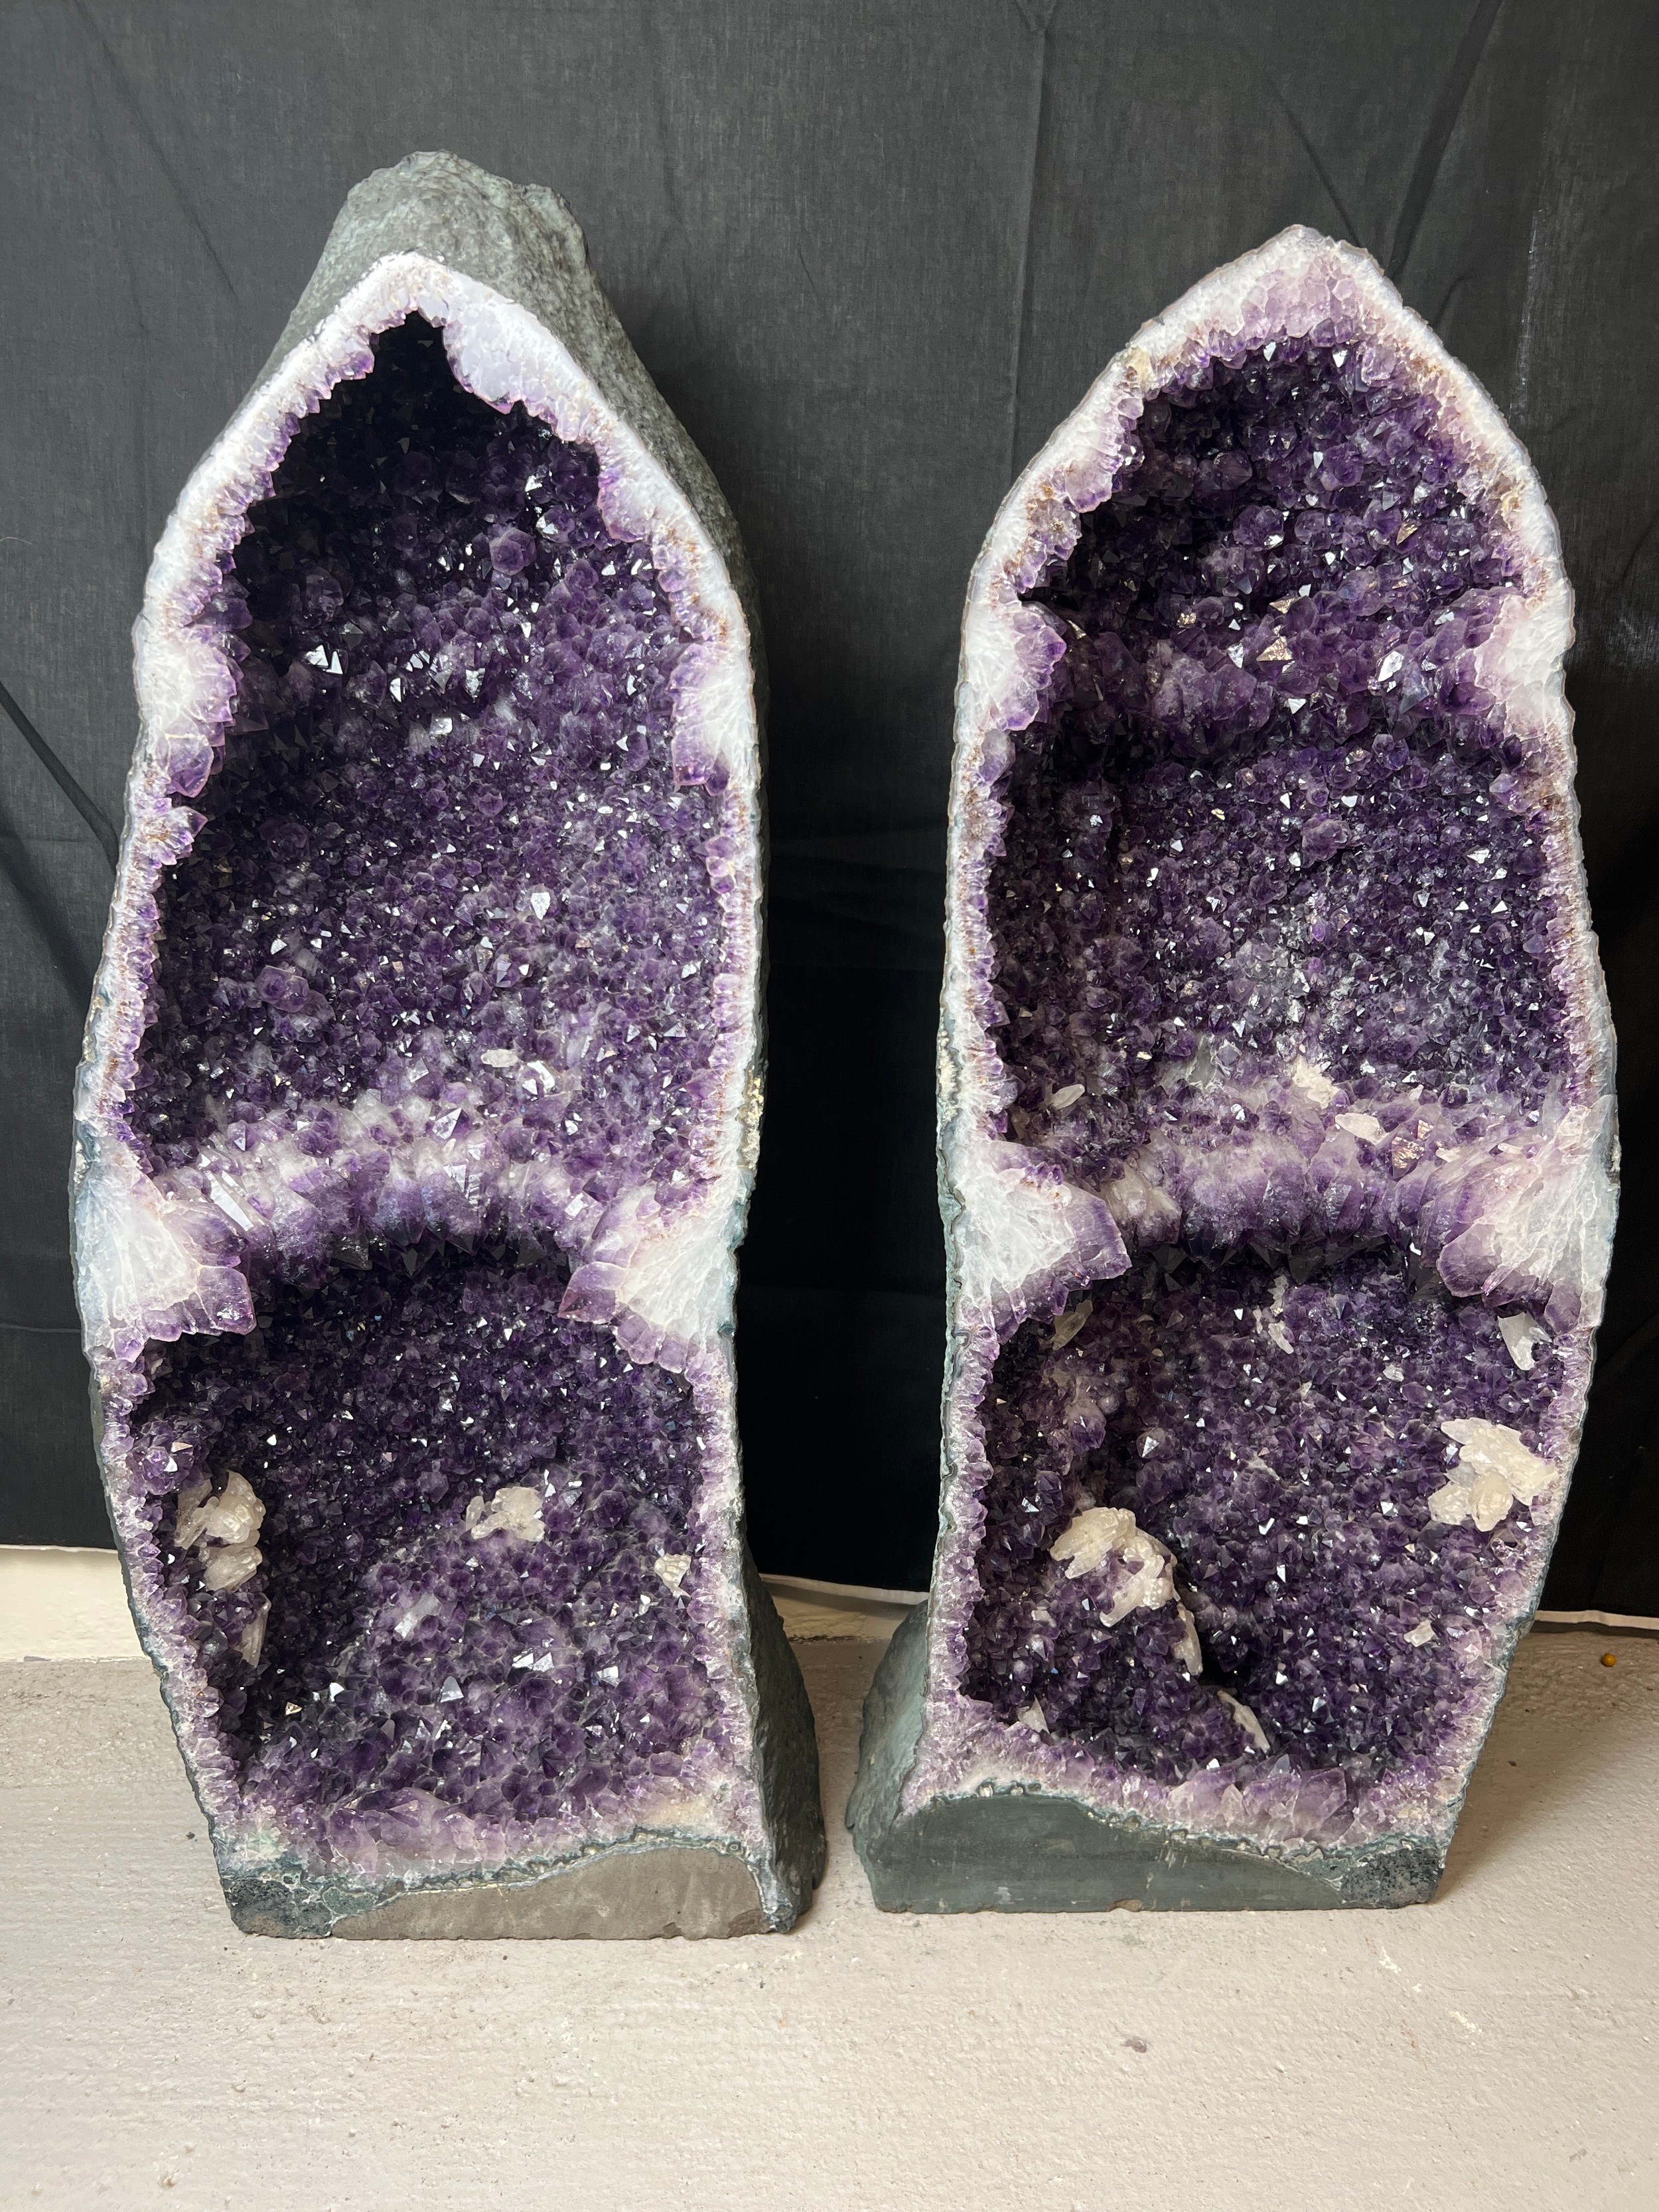 A very large amethyst crystal geode pair - rare as complete geode cut in half. Approx. 102cm tall